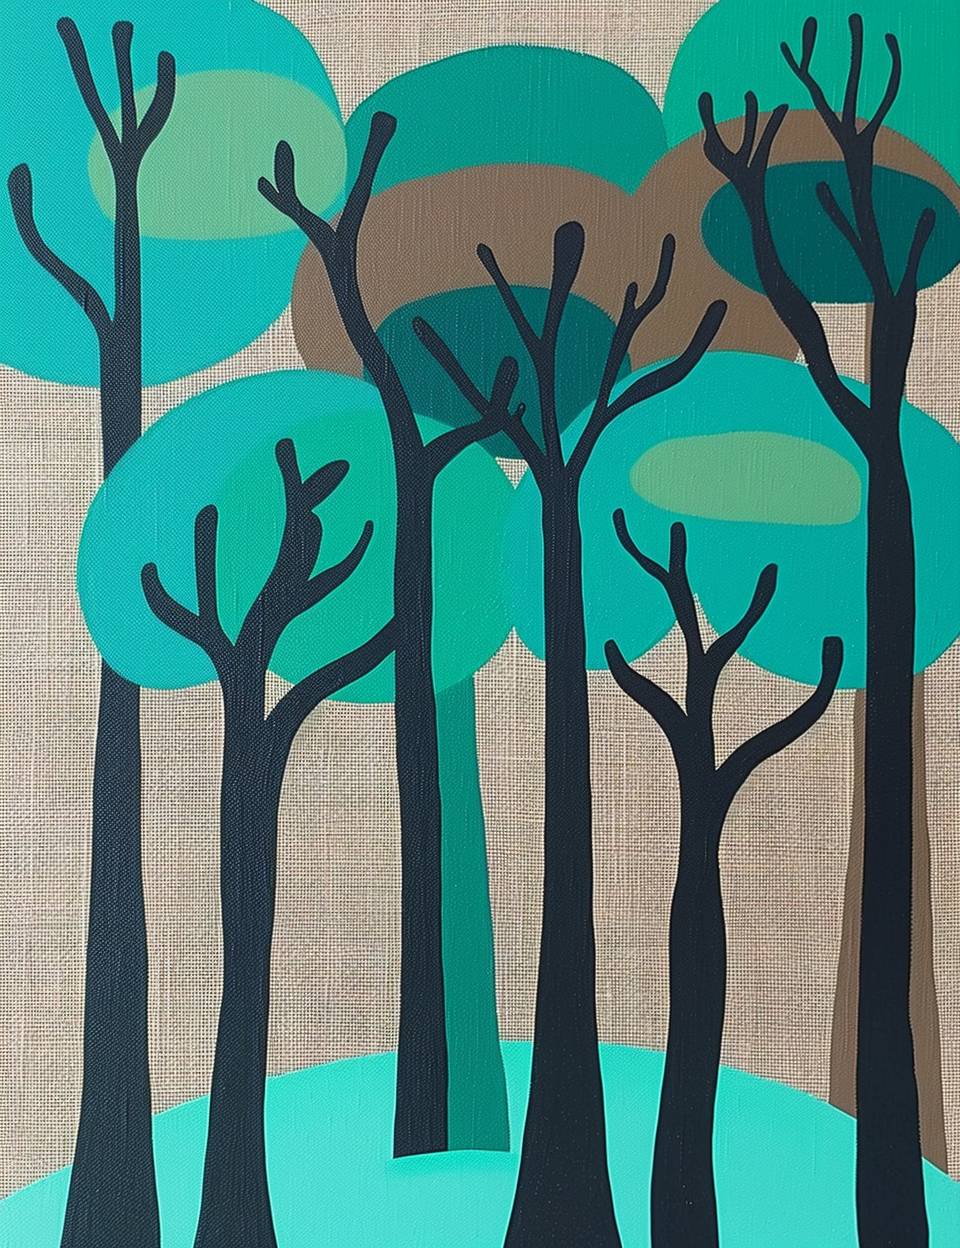 A simple painting of tall trees in the style of mid century modern, with aqua green and brown tones, simple shapes, on a burlap background.